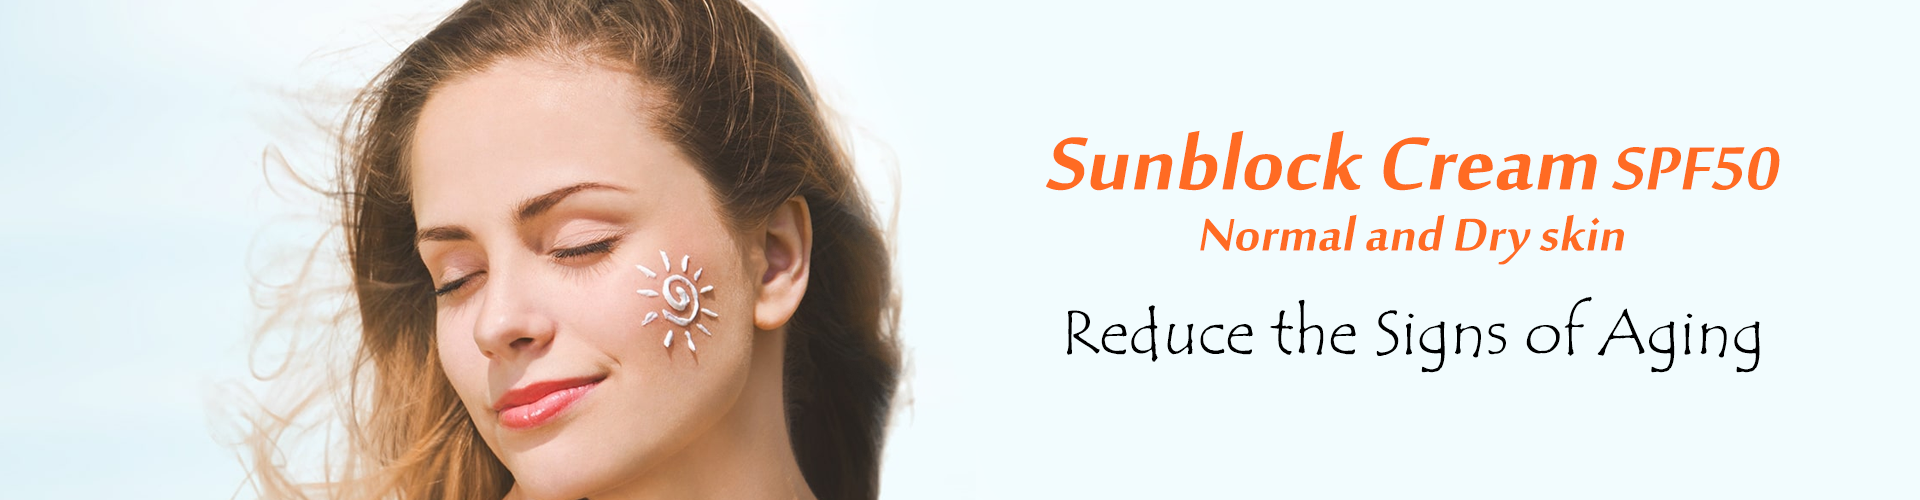 Sunblock Cream SPF50 For Normal and Dry skin - ALBADERM Middle East - Skincare Products